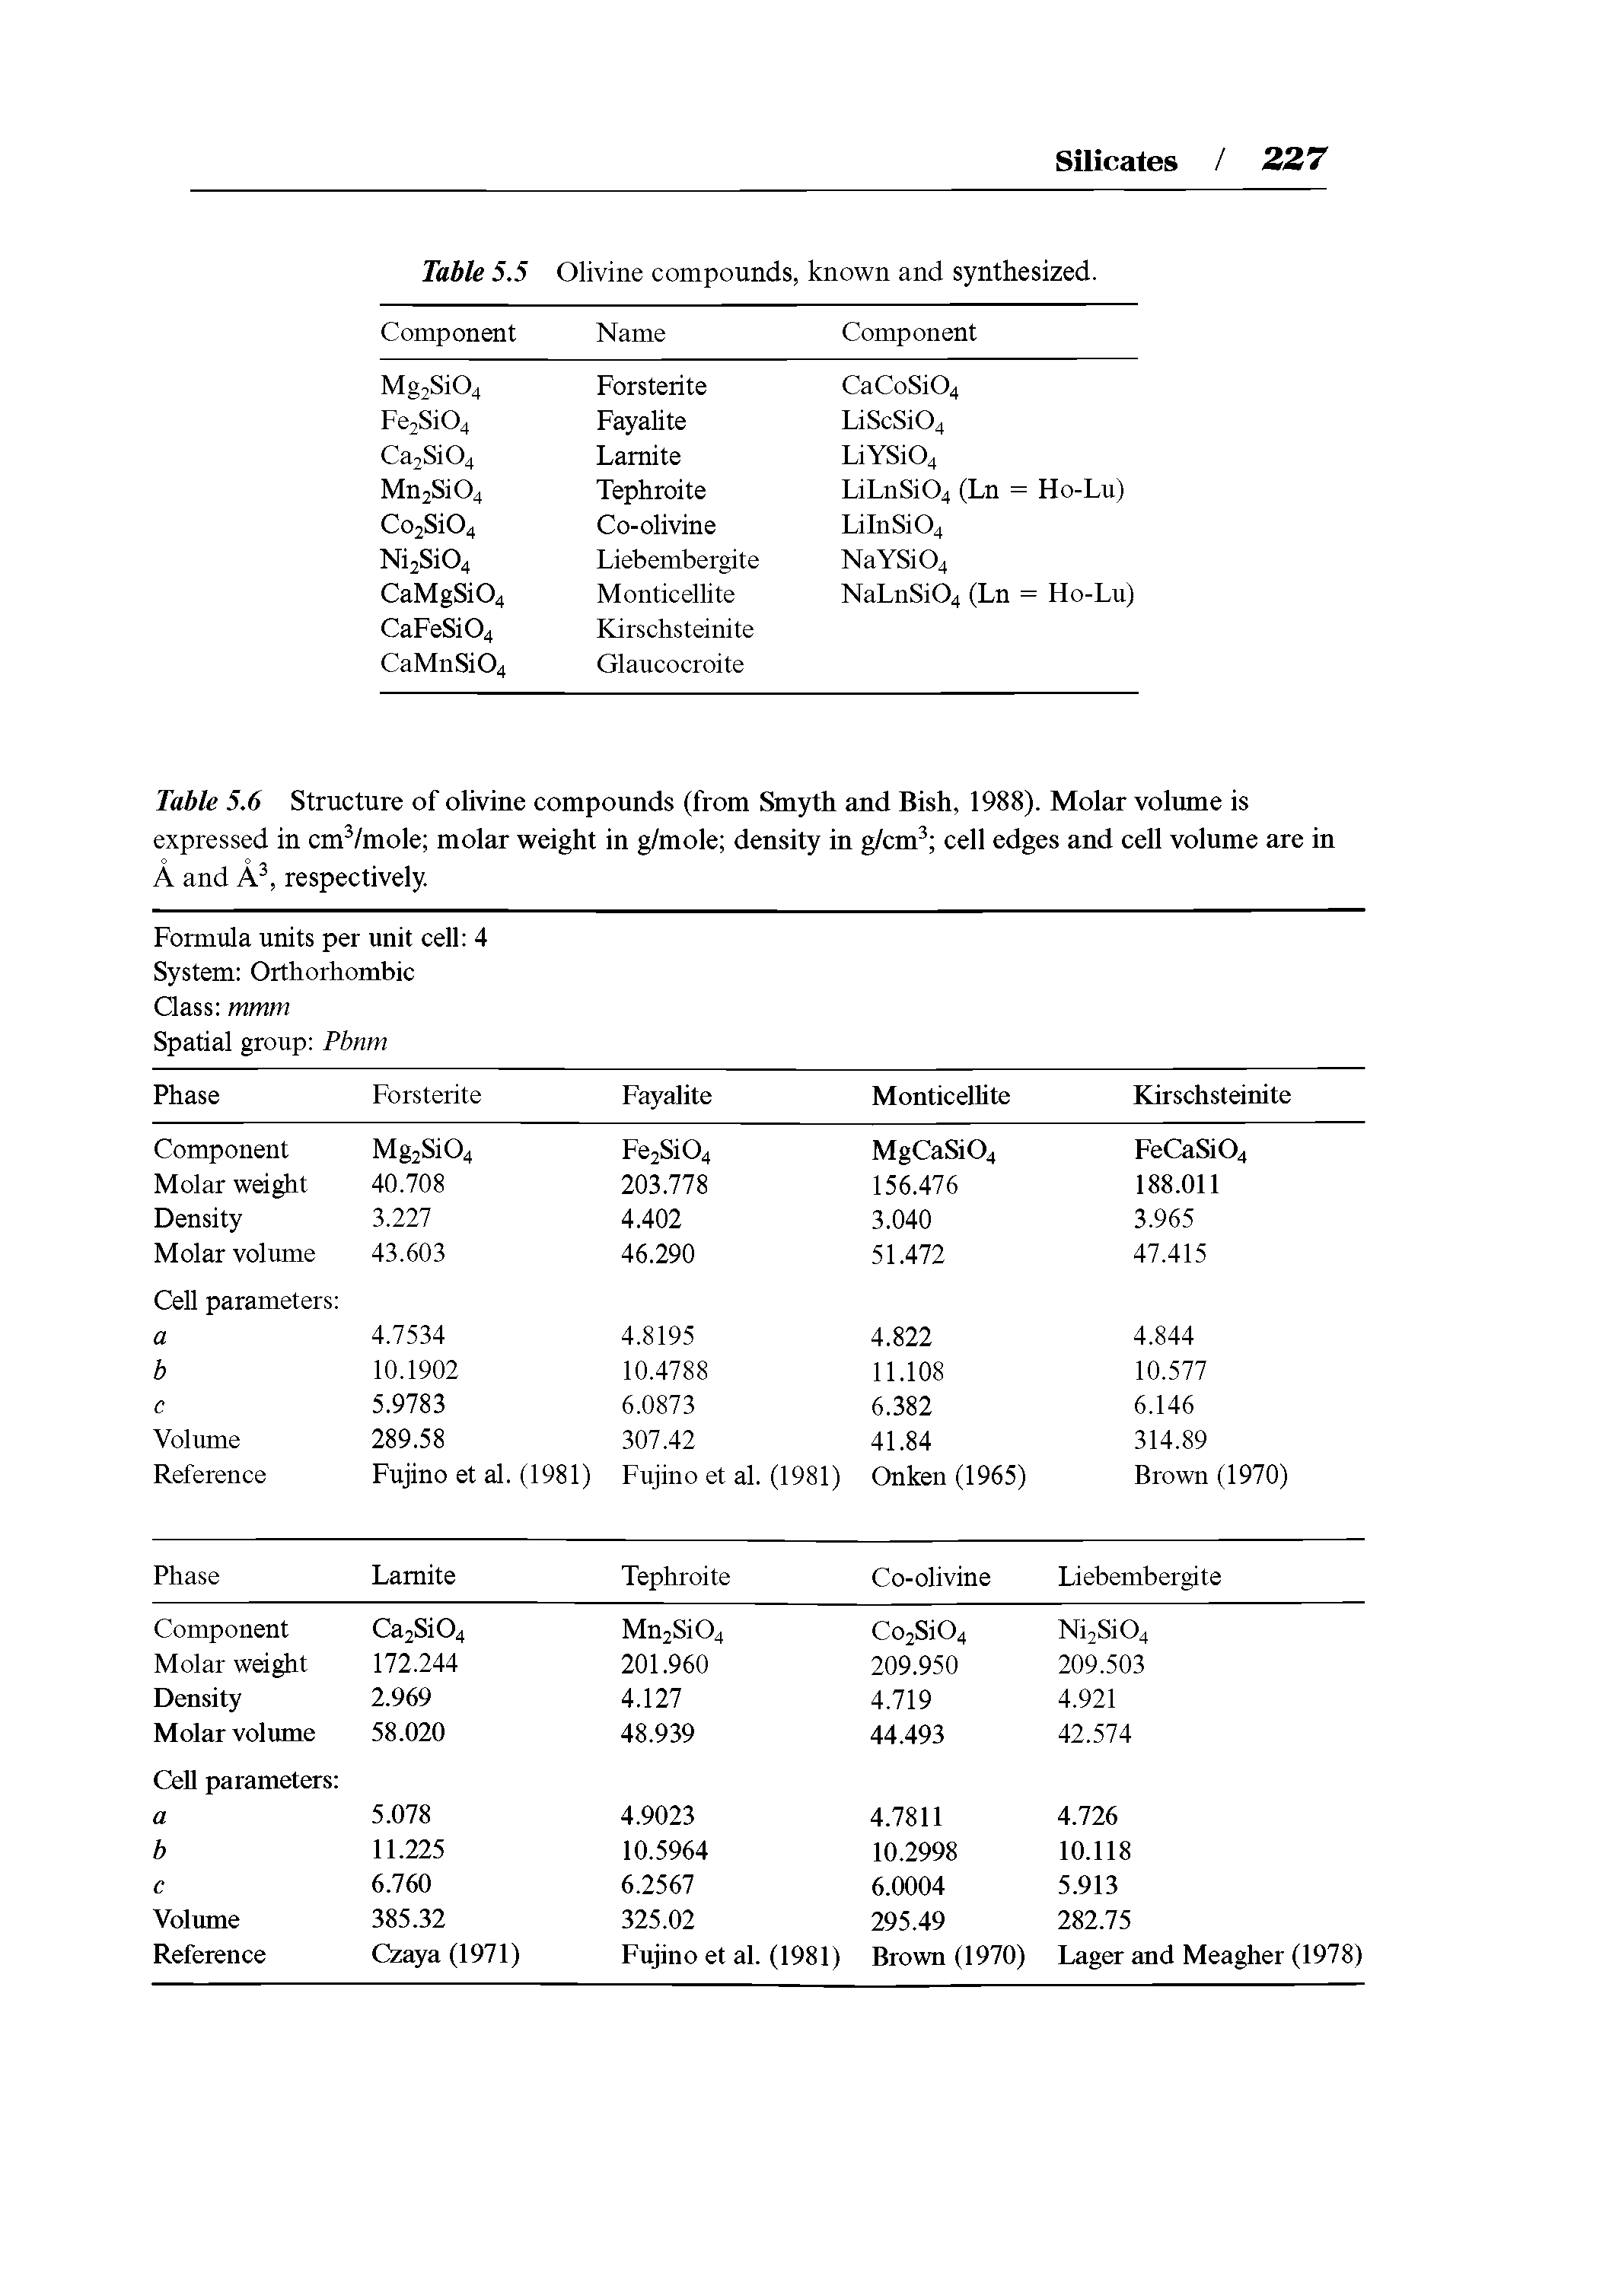 Table 5.6 Structure of olivine compounds (from Smyth and Bish, 1988). Molar volnme is expressed in cm /mole molar weight in g/mole density in g/cm cell edges and cell volume are in A and A, respectively.